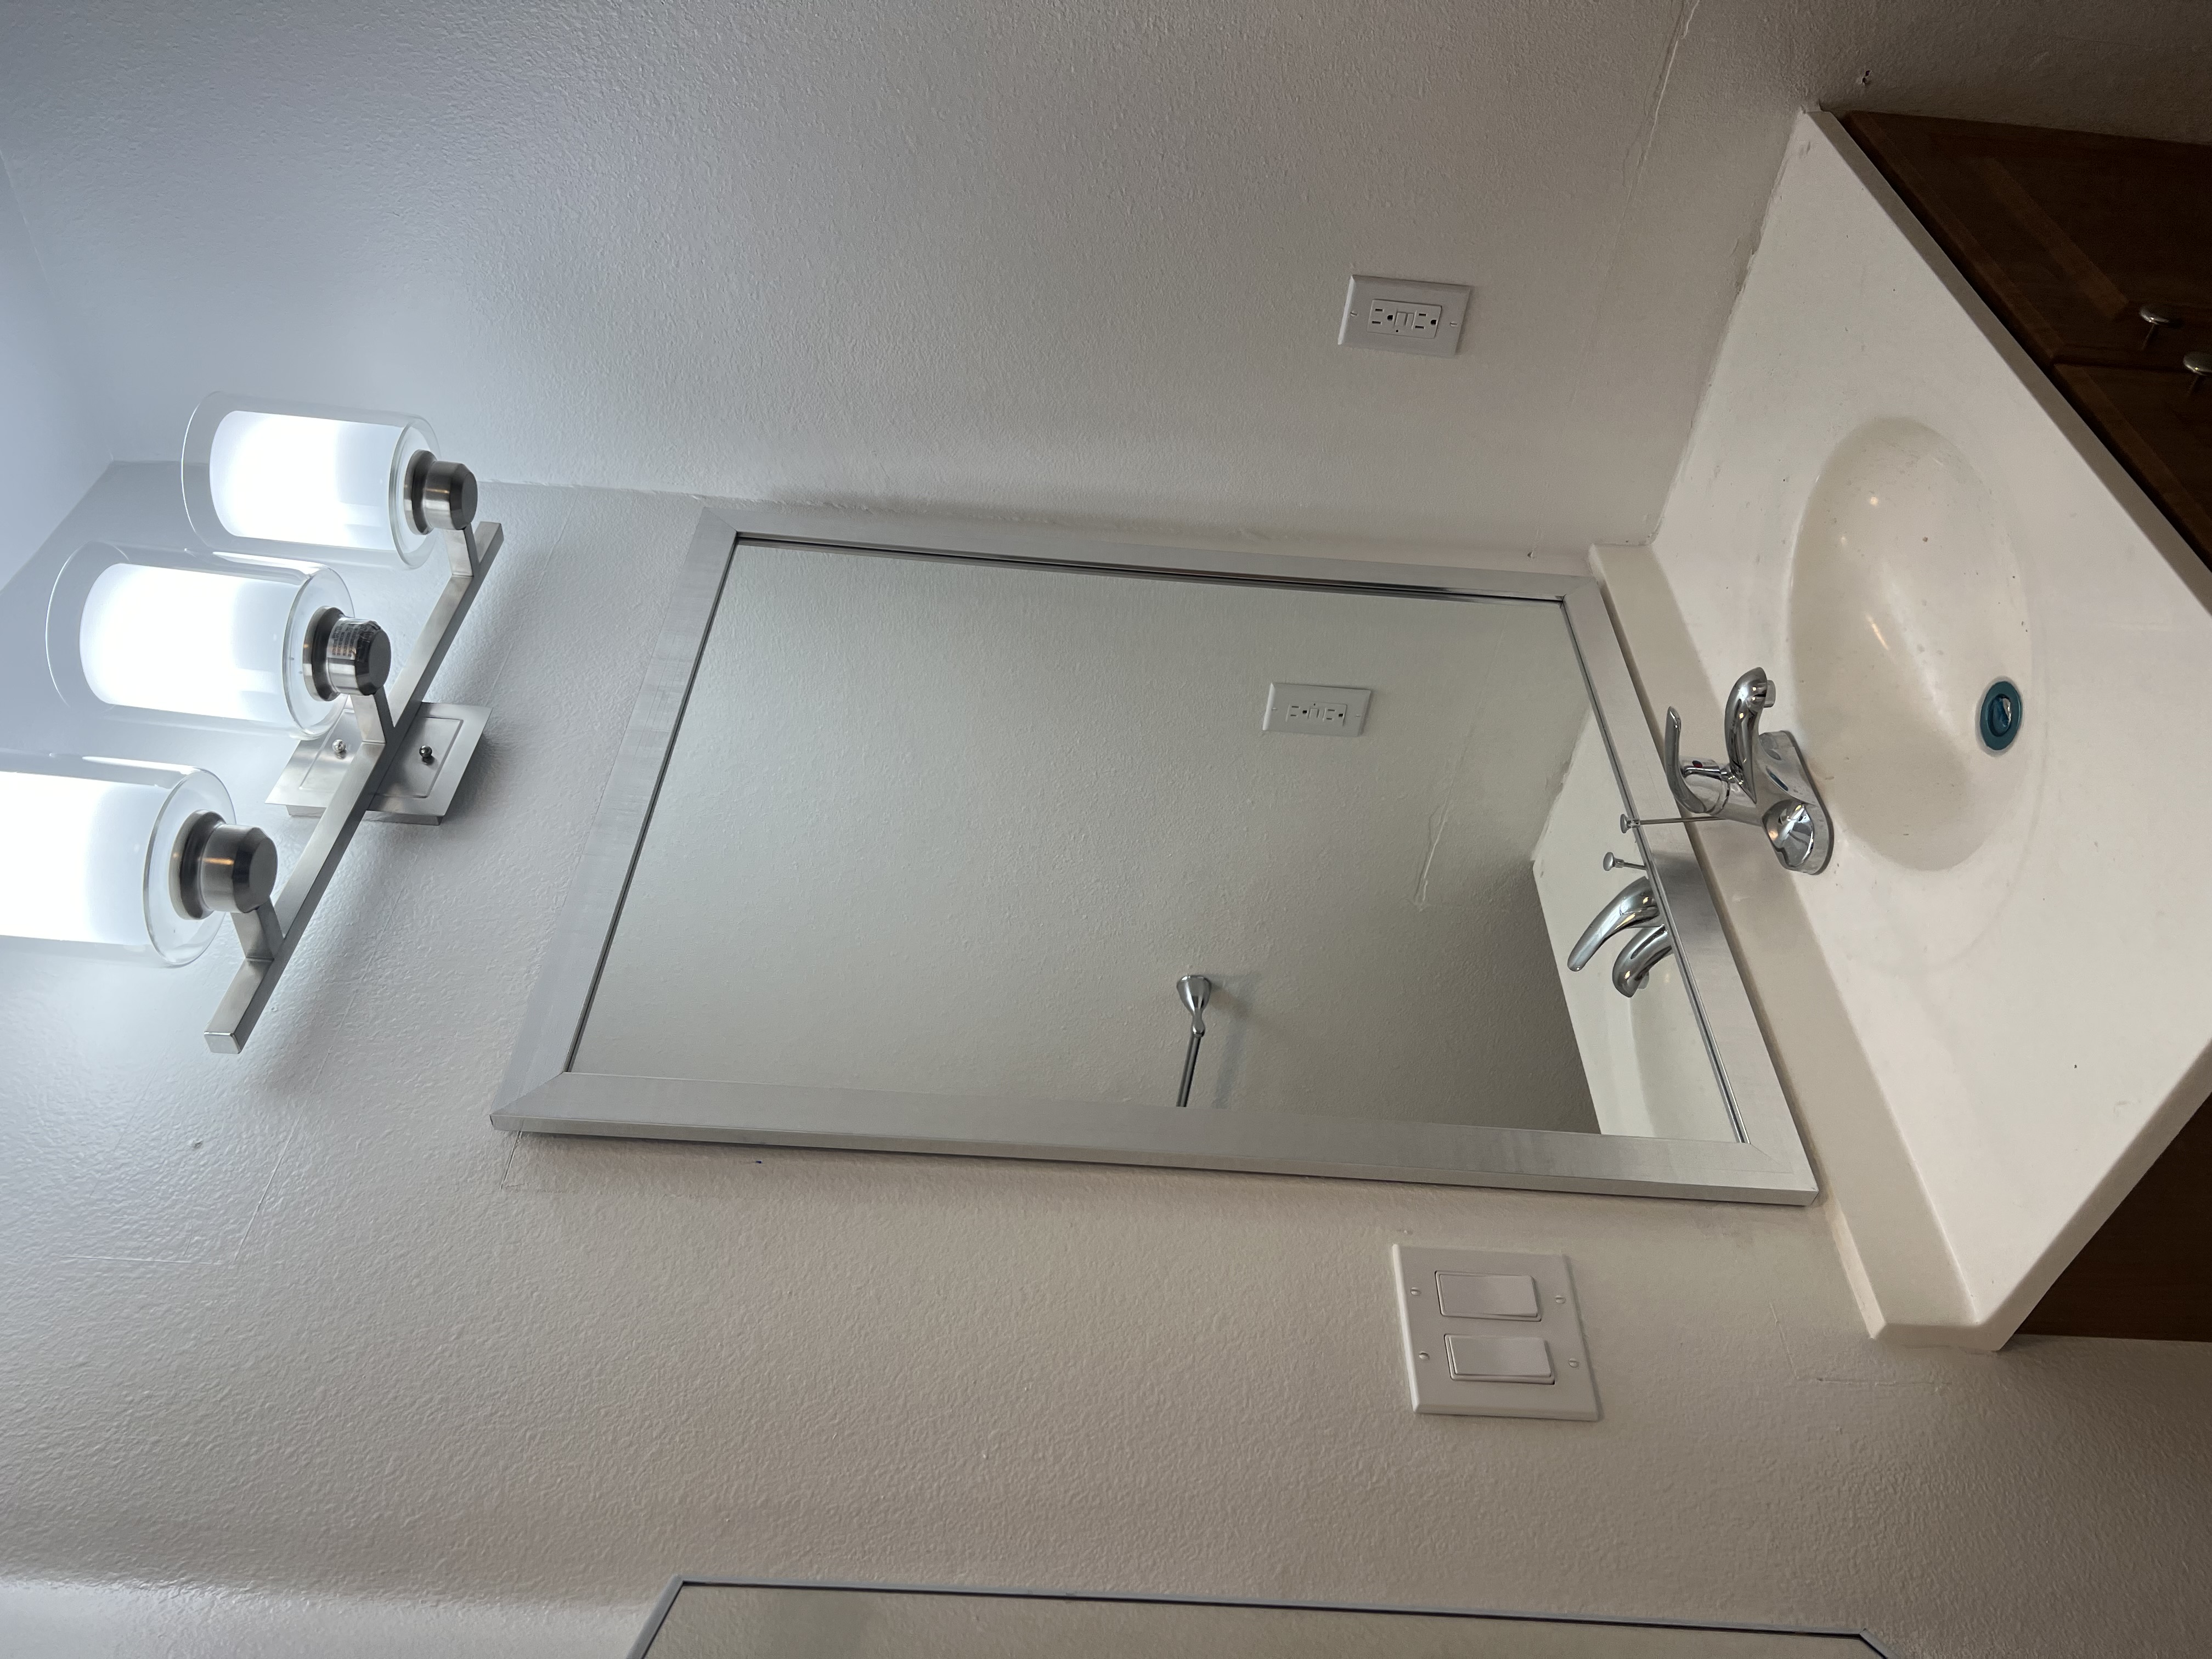 Photo of an empty bathroom showing a white sink and mirror